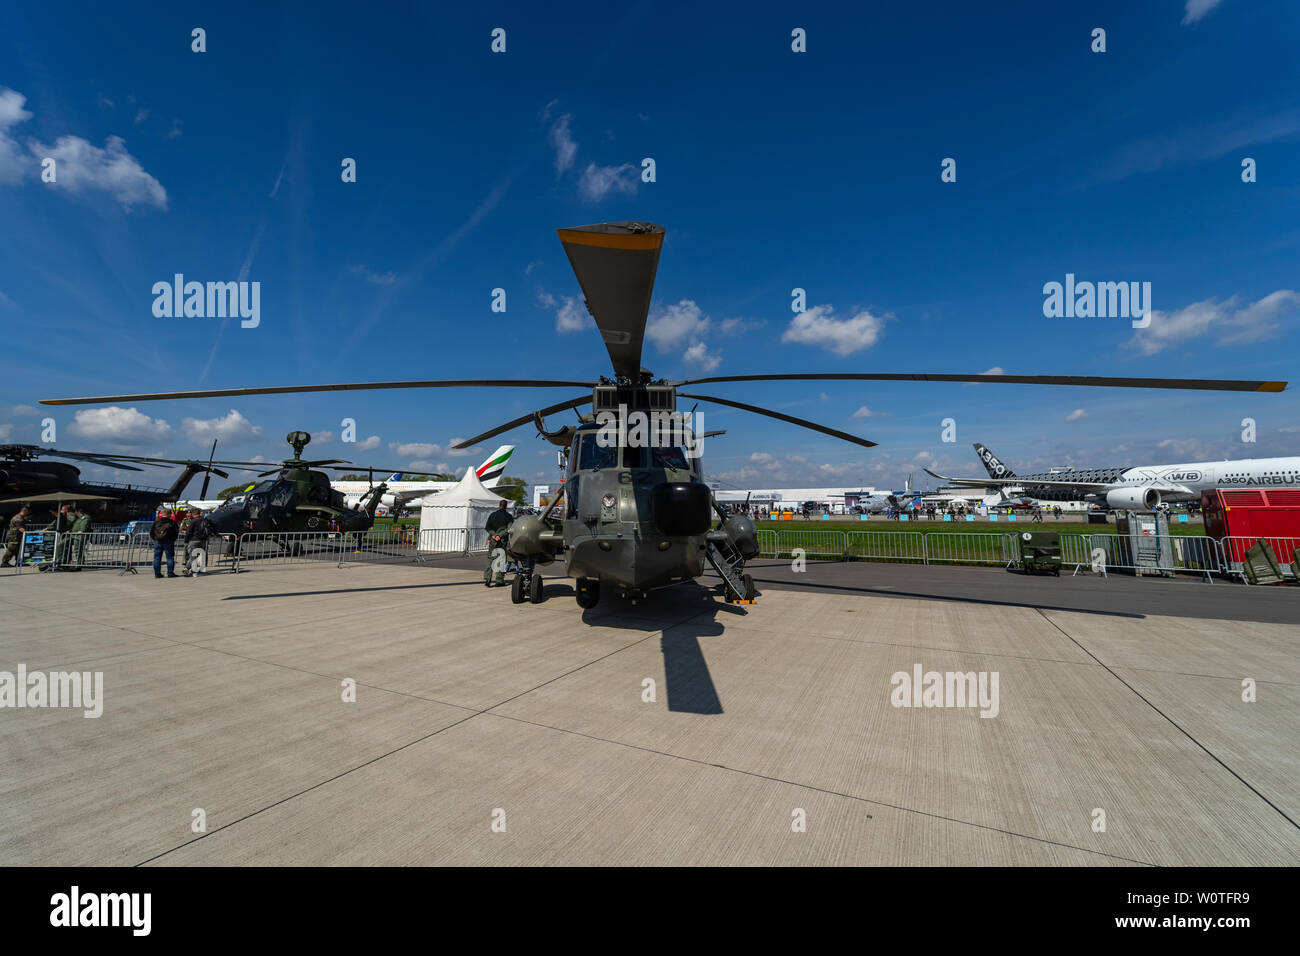 BERLIN, GERMANY - APRIL 27, 2018: Anti-submarine warfare, search and rescue and utility helicopter Sikorsky SH-3 Sea King. German Navy. Exhibition ILA Berlin Air Show 2018. Stock Photo